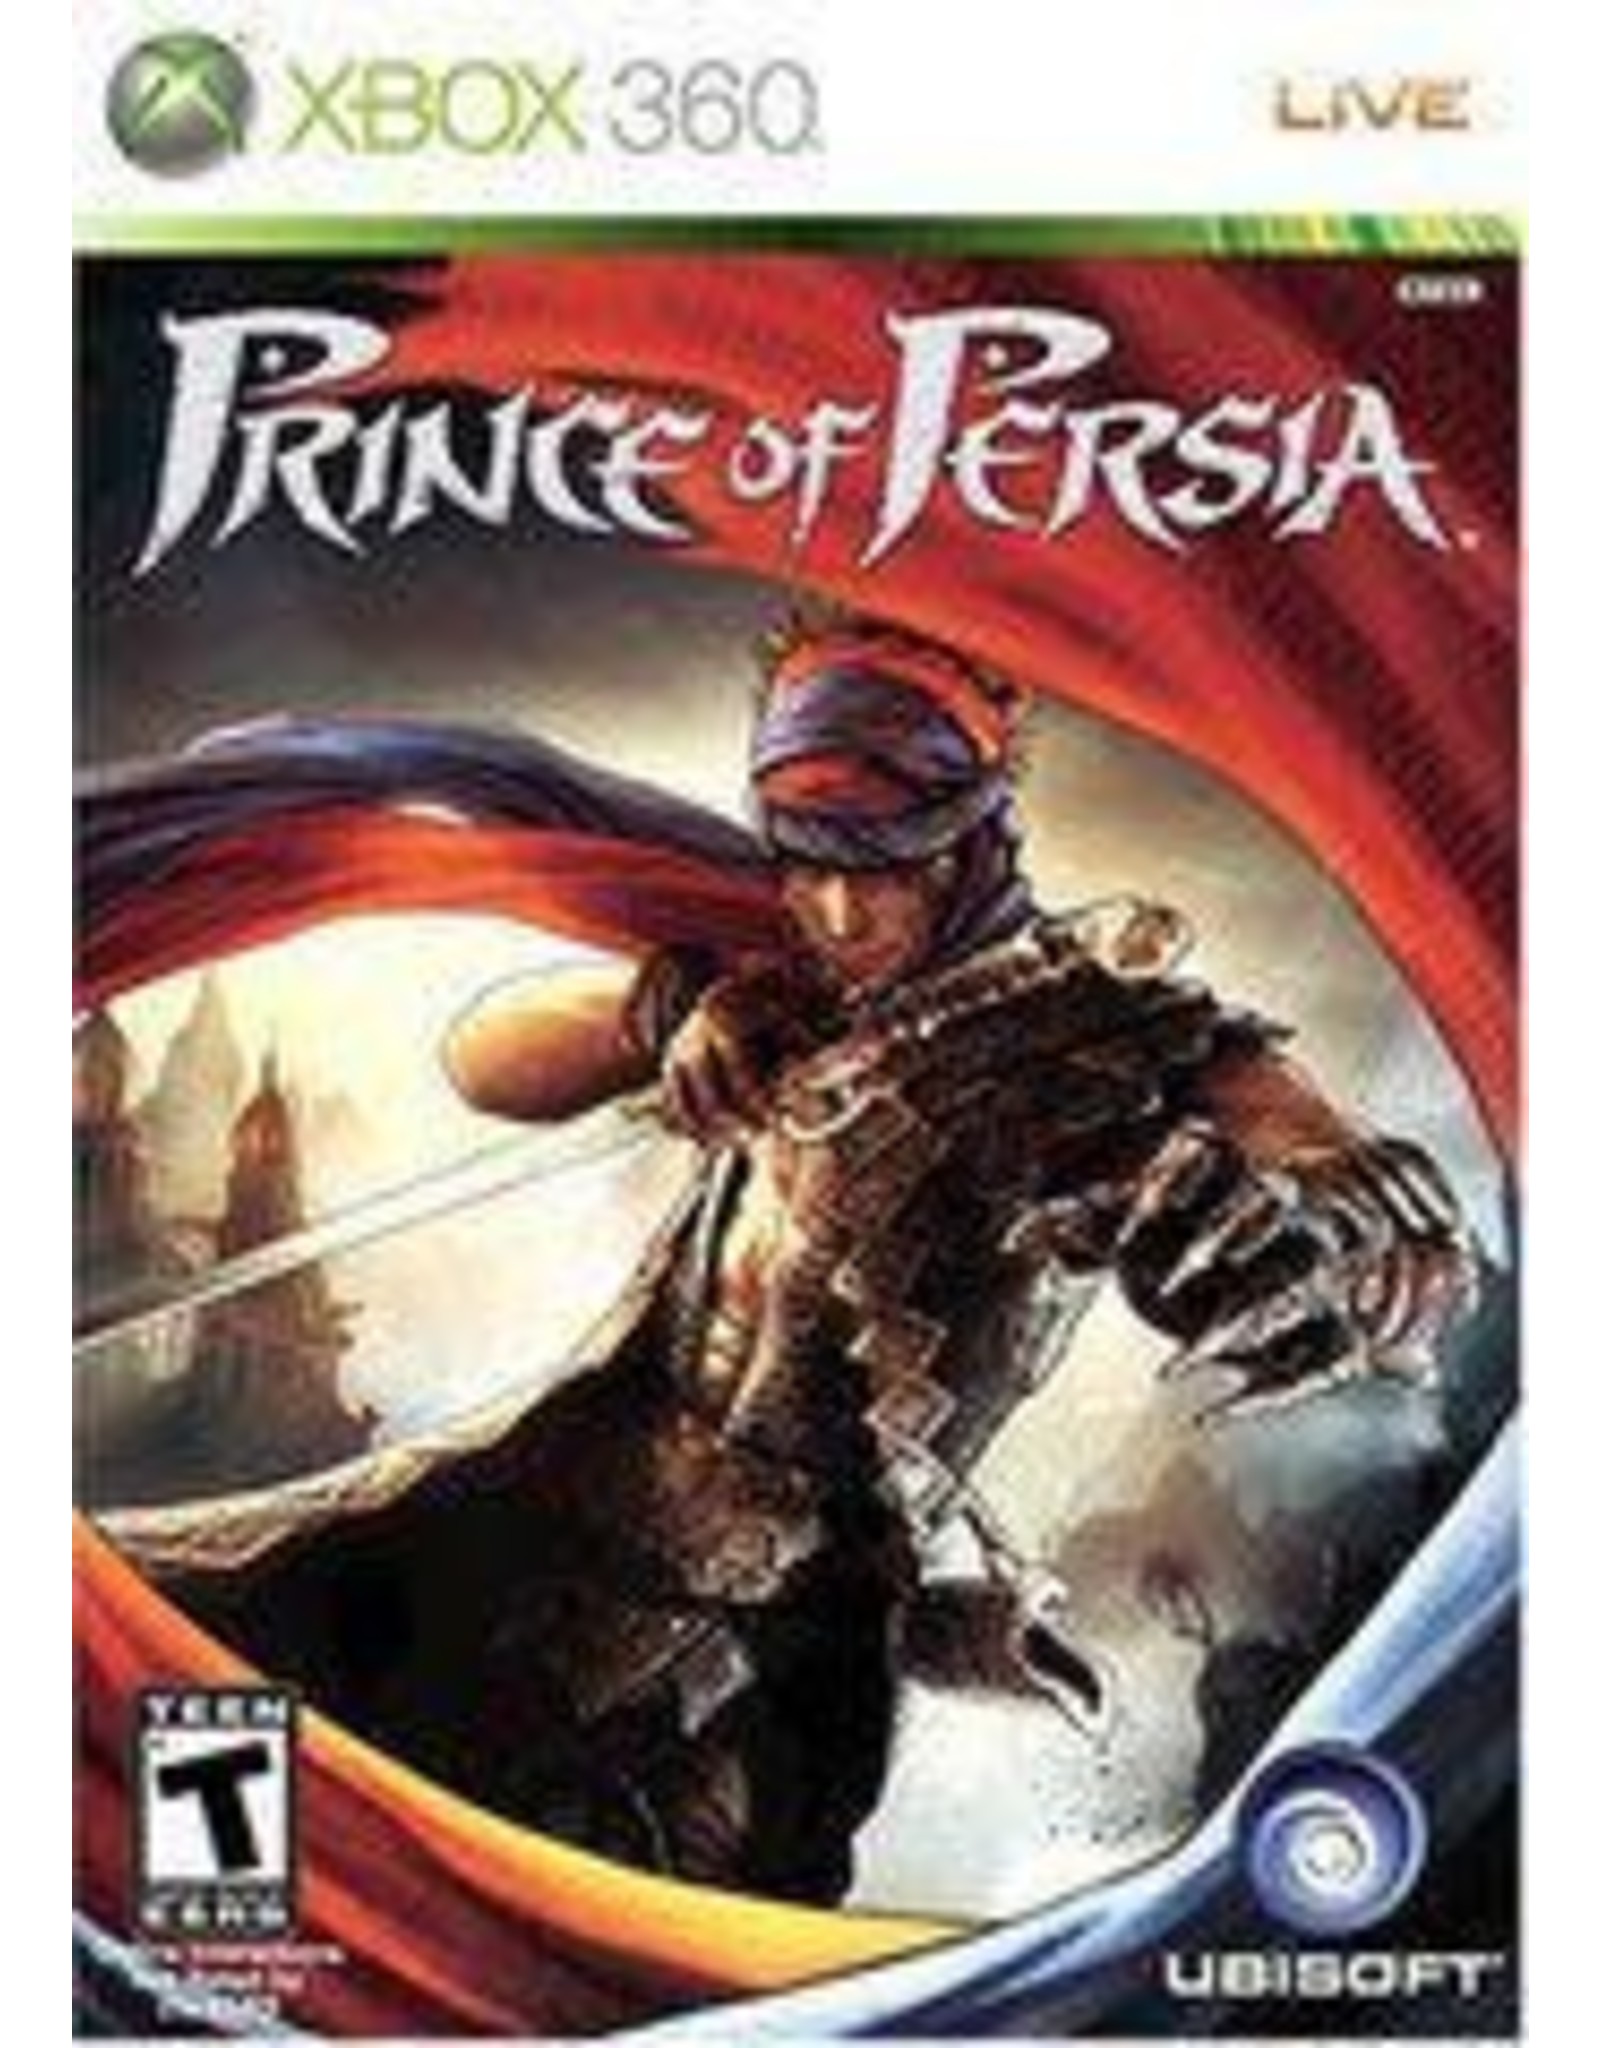 Xbox 360 Prince of Persia (Used)